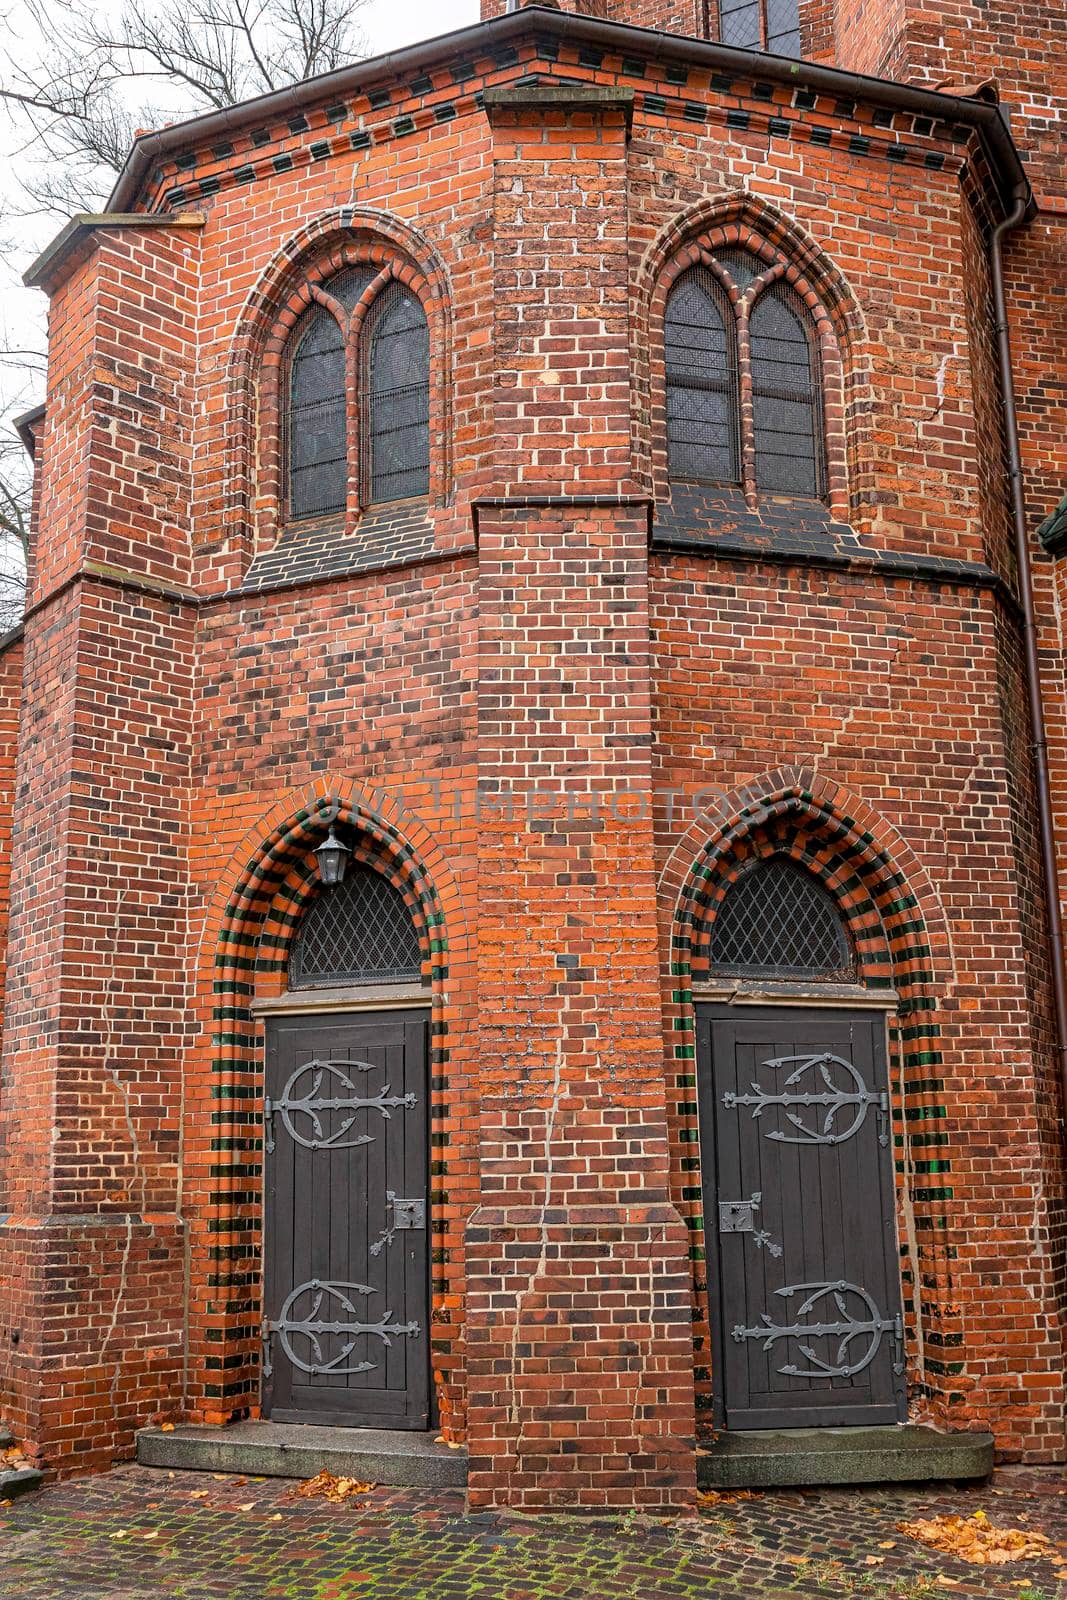 Fragment of a red brick building and the original doors of the Church of St. Michaelis in the old town of Lüneburg